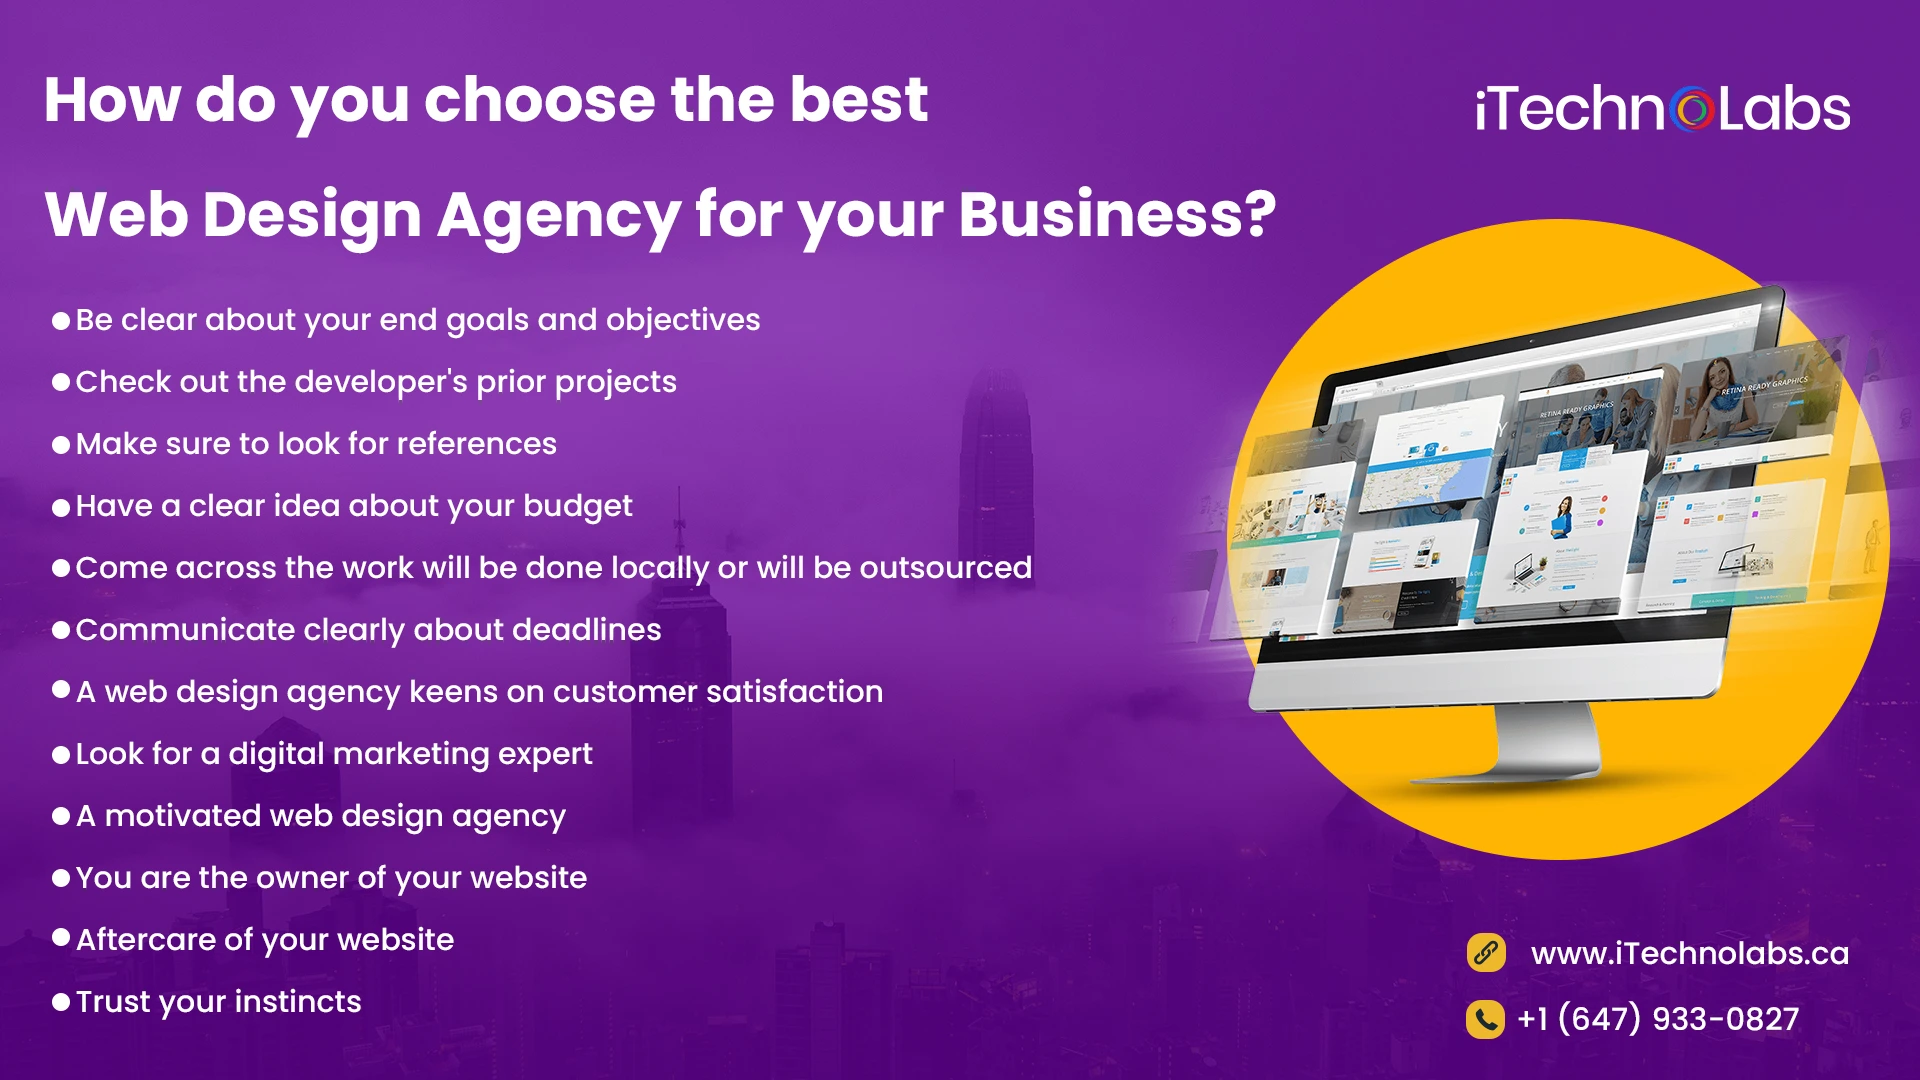 How do you choose the best Web Design Agency for your Business itechnolabs